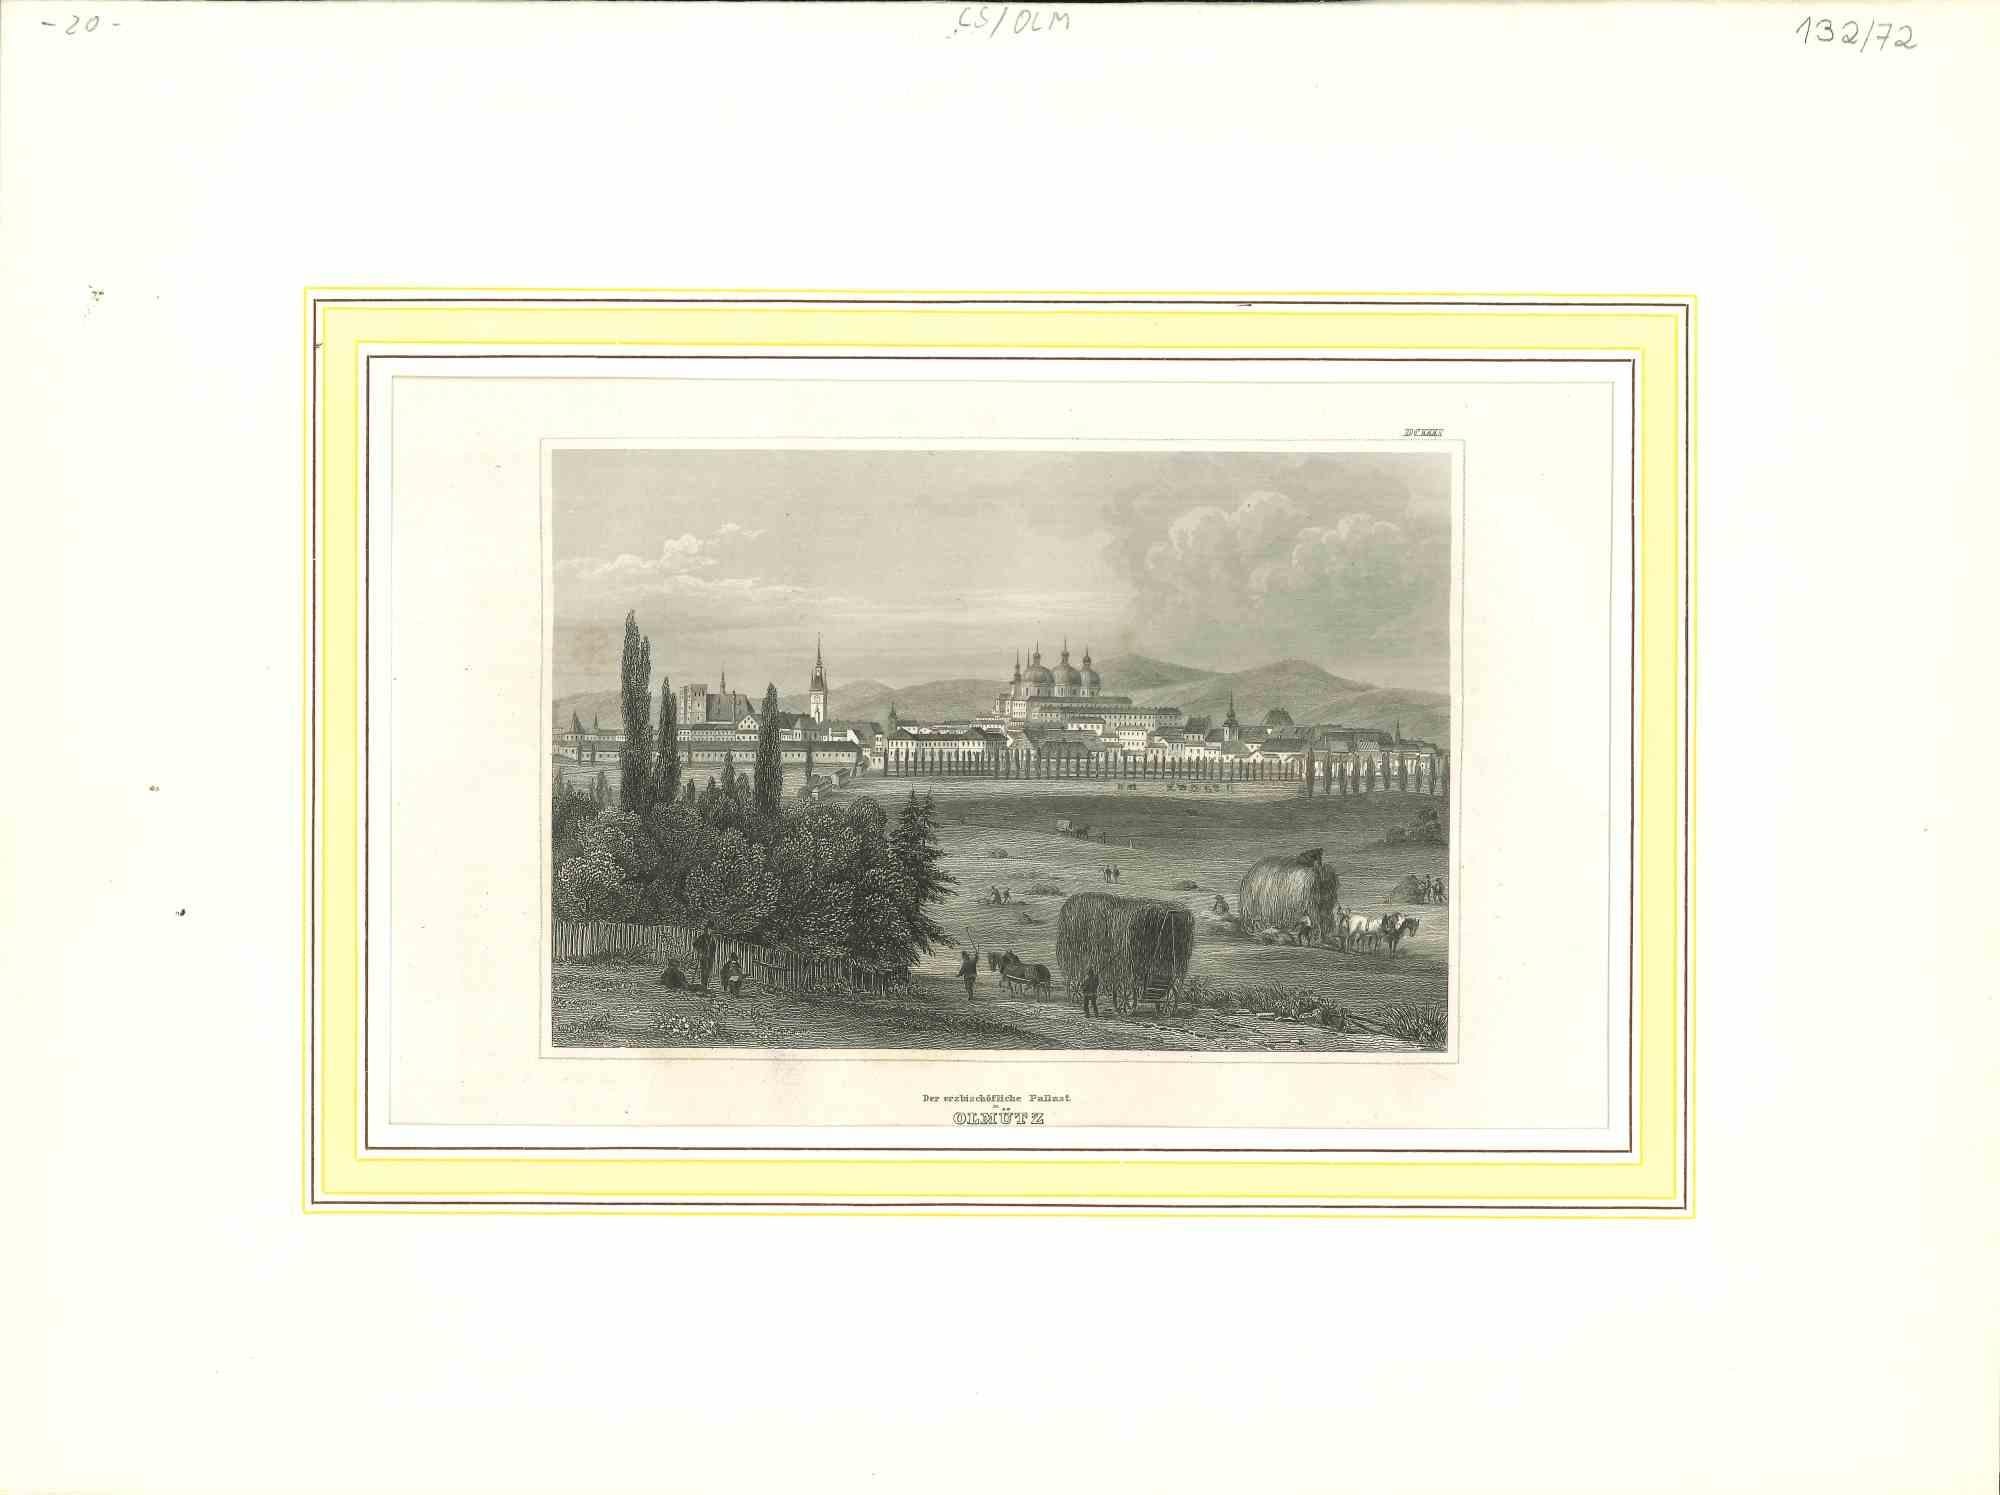 Unknown Figurative Print - Ancient View of Olmutz - Original lithograph - First Half of the 19th century